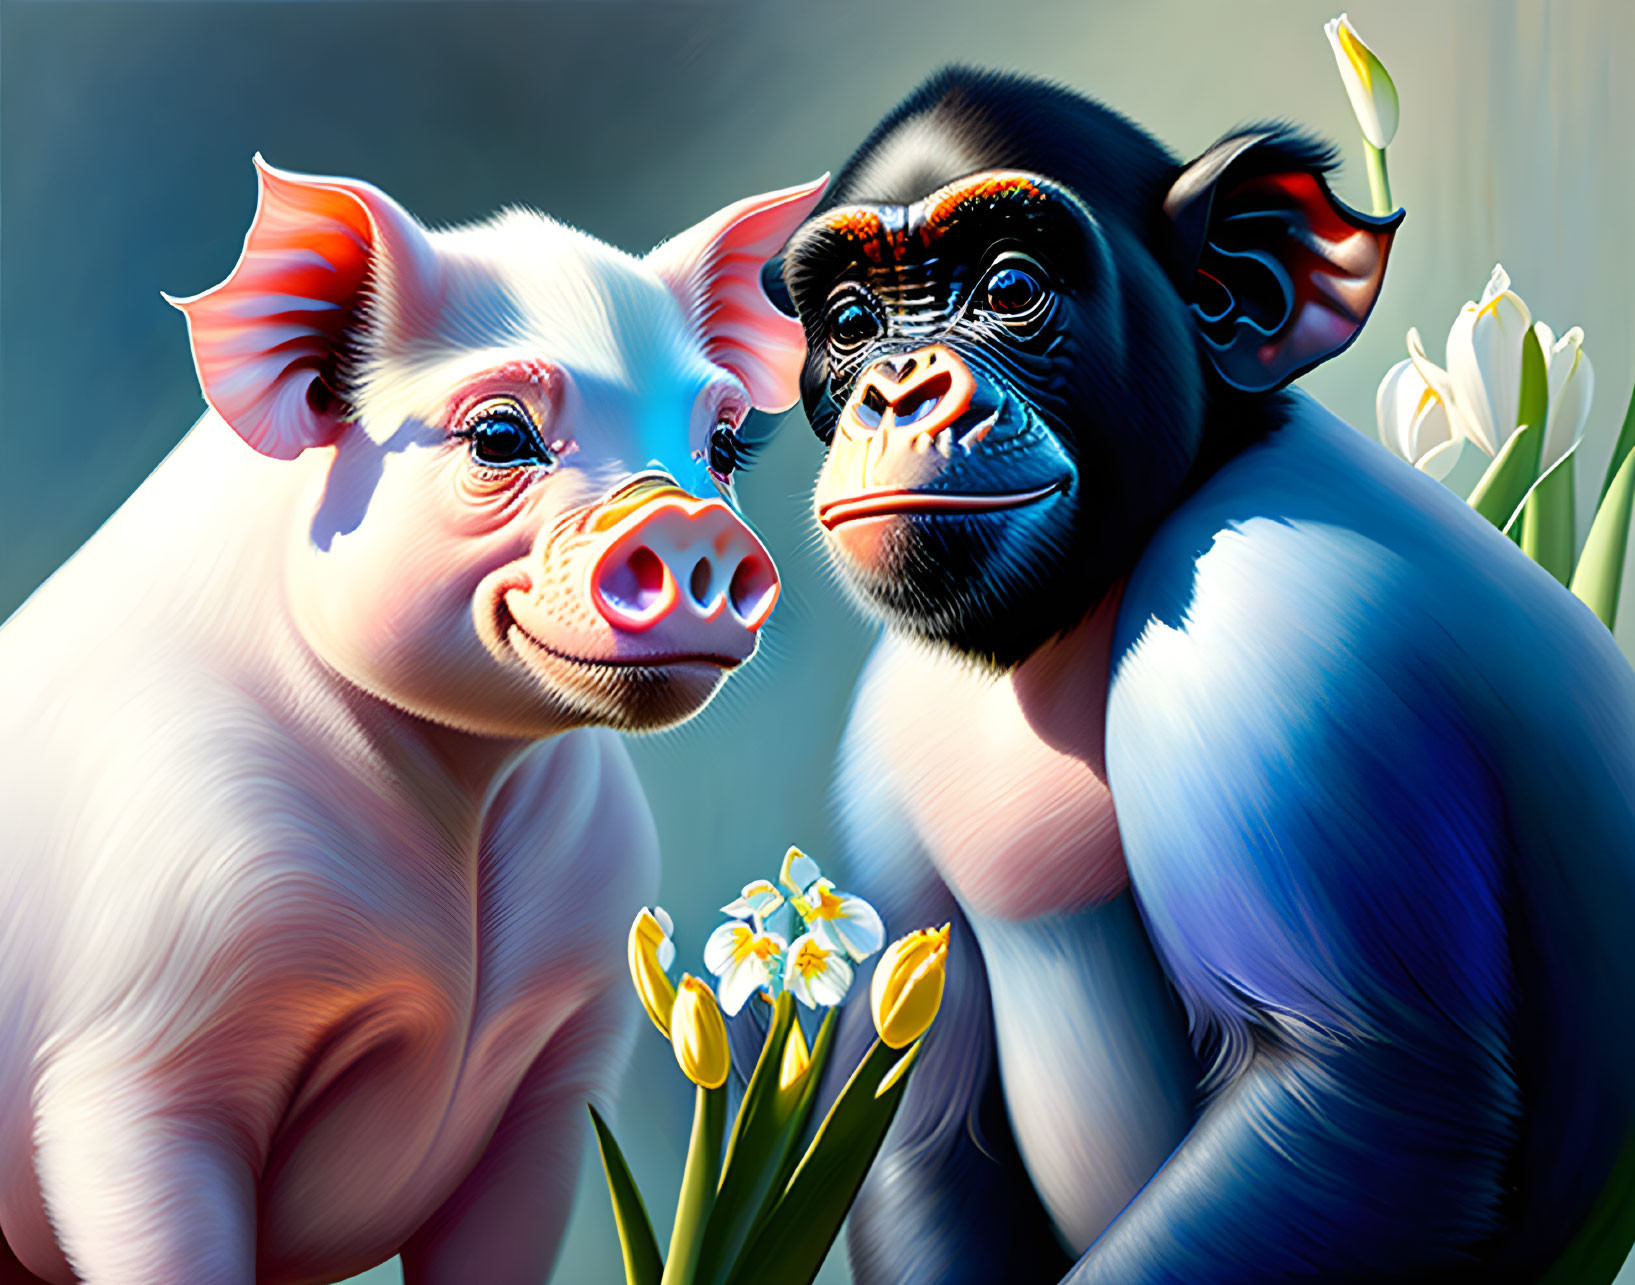 Cute pigs and chimps